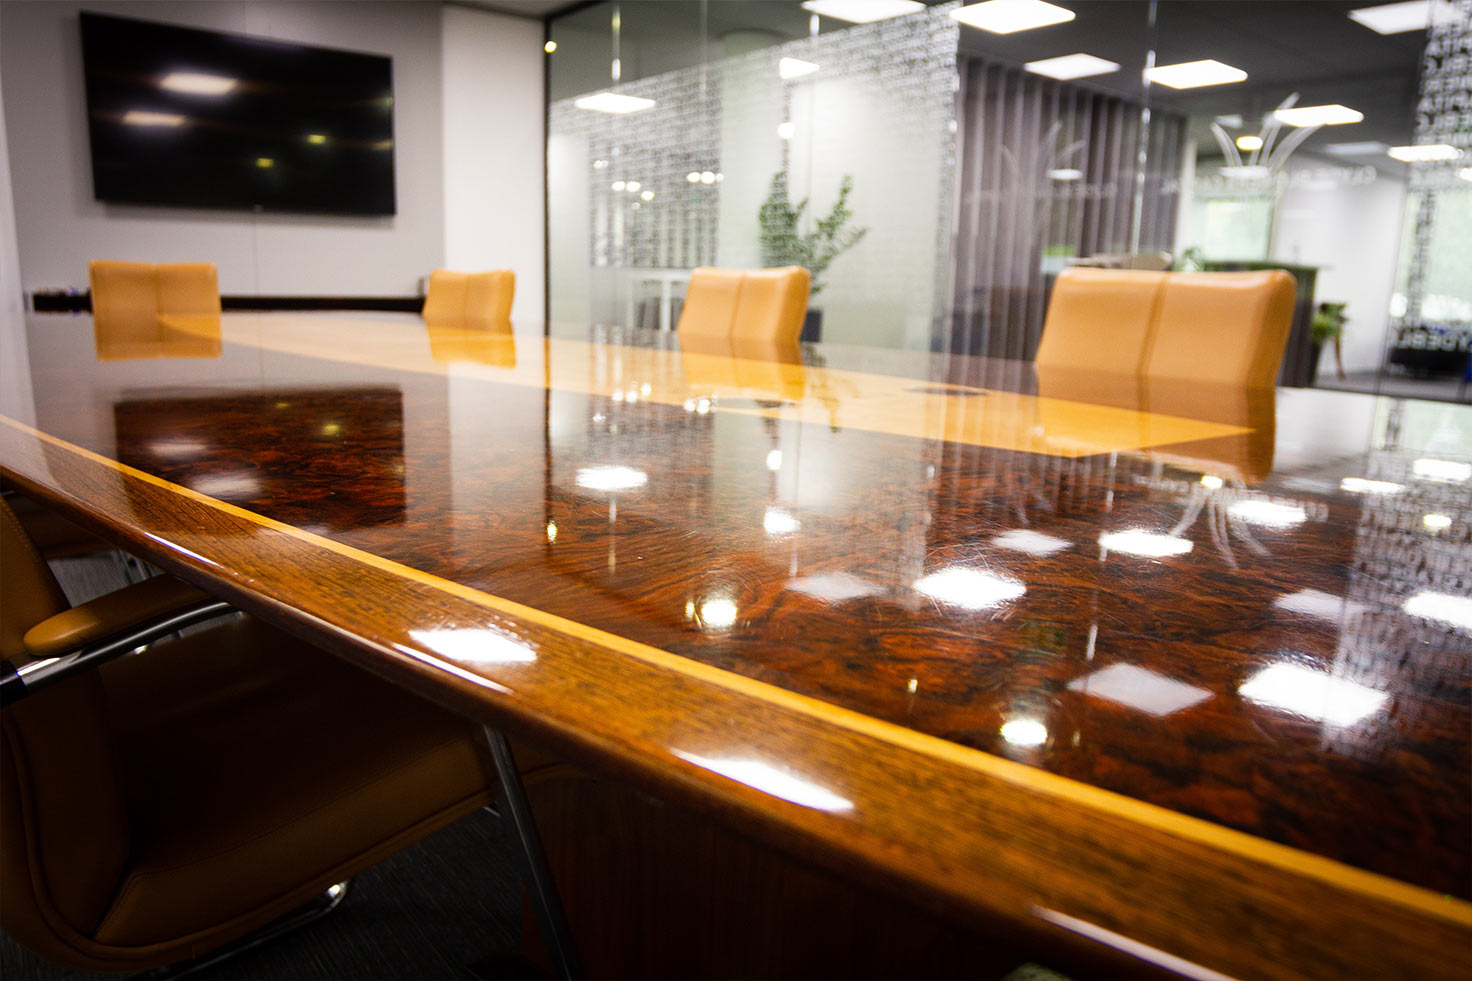 Boardroom desk and chairs at Clyde Blowers Capital Ltd - Designed and Installed by Jack Hyams